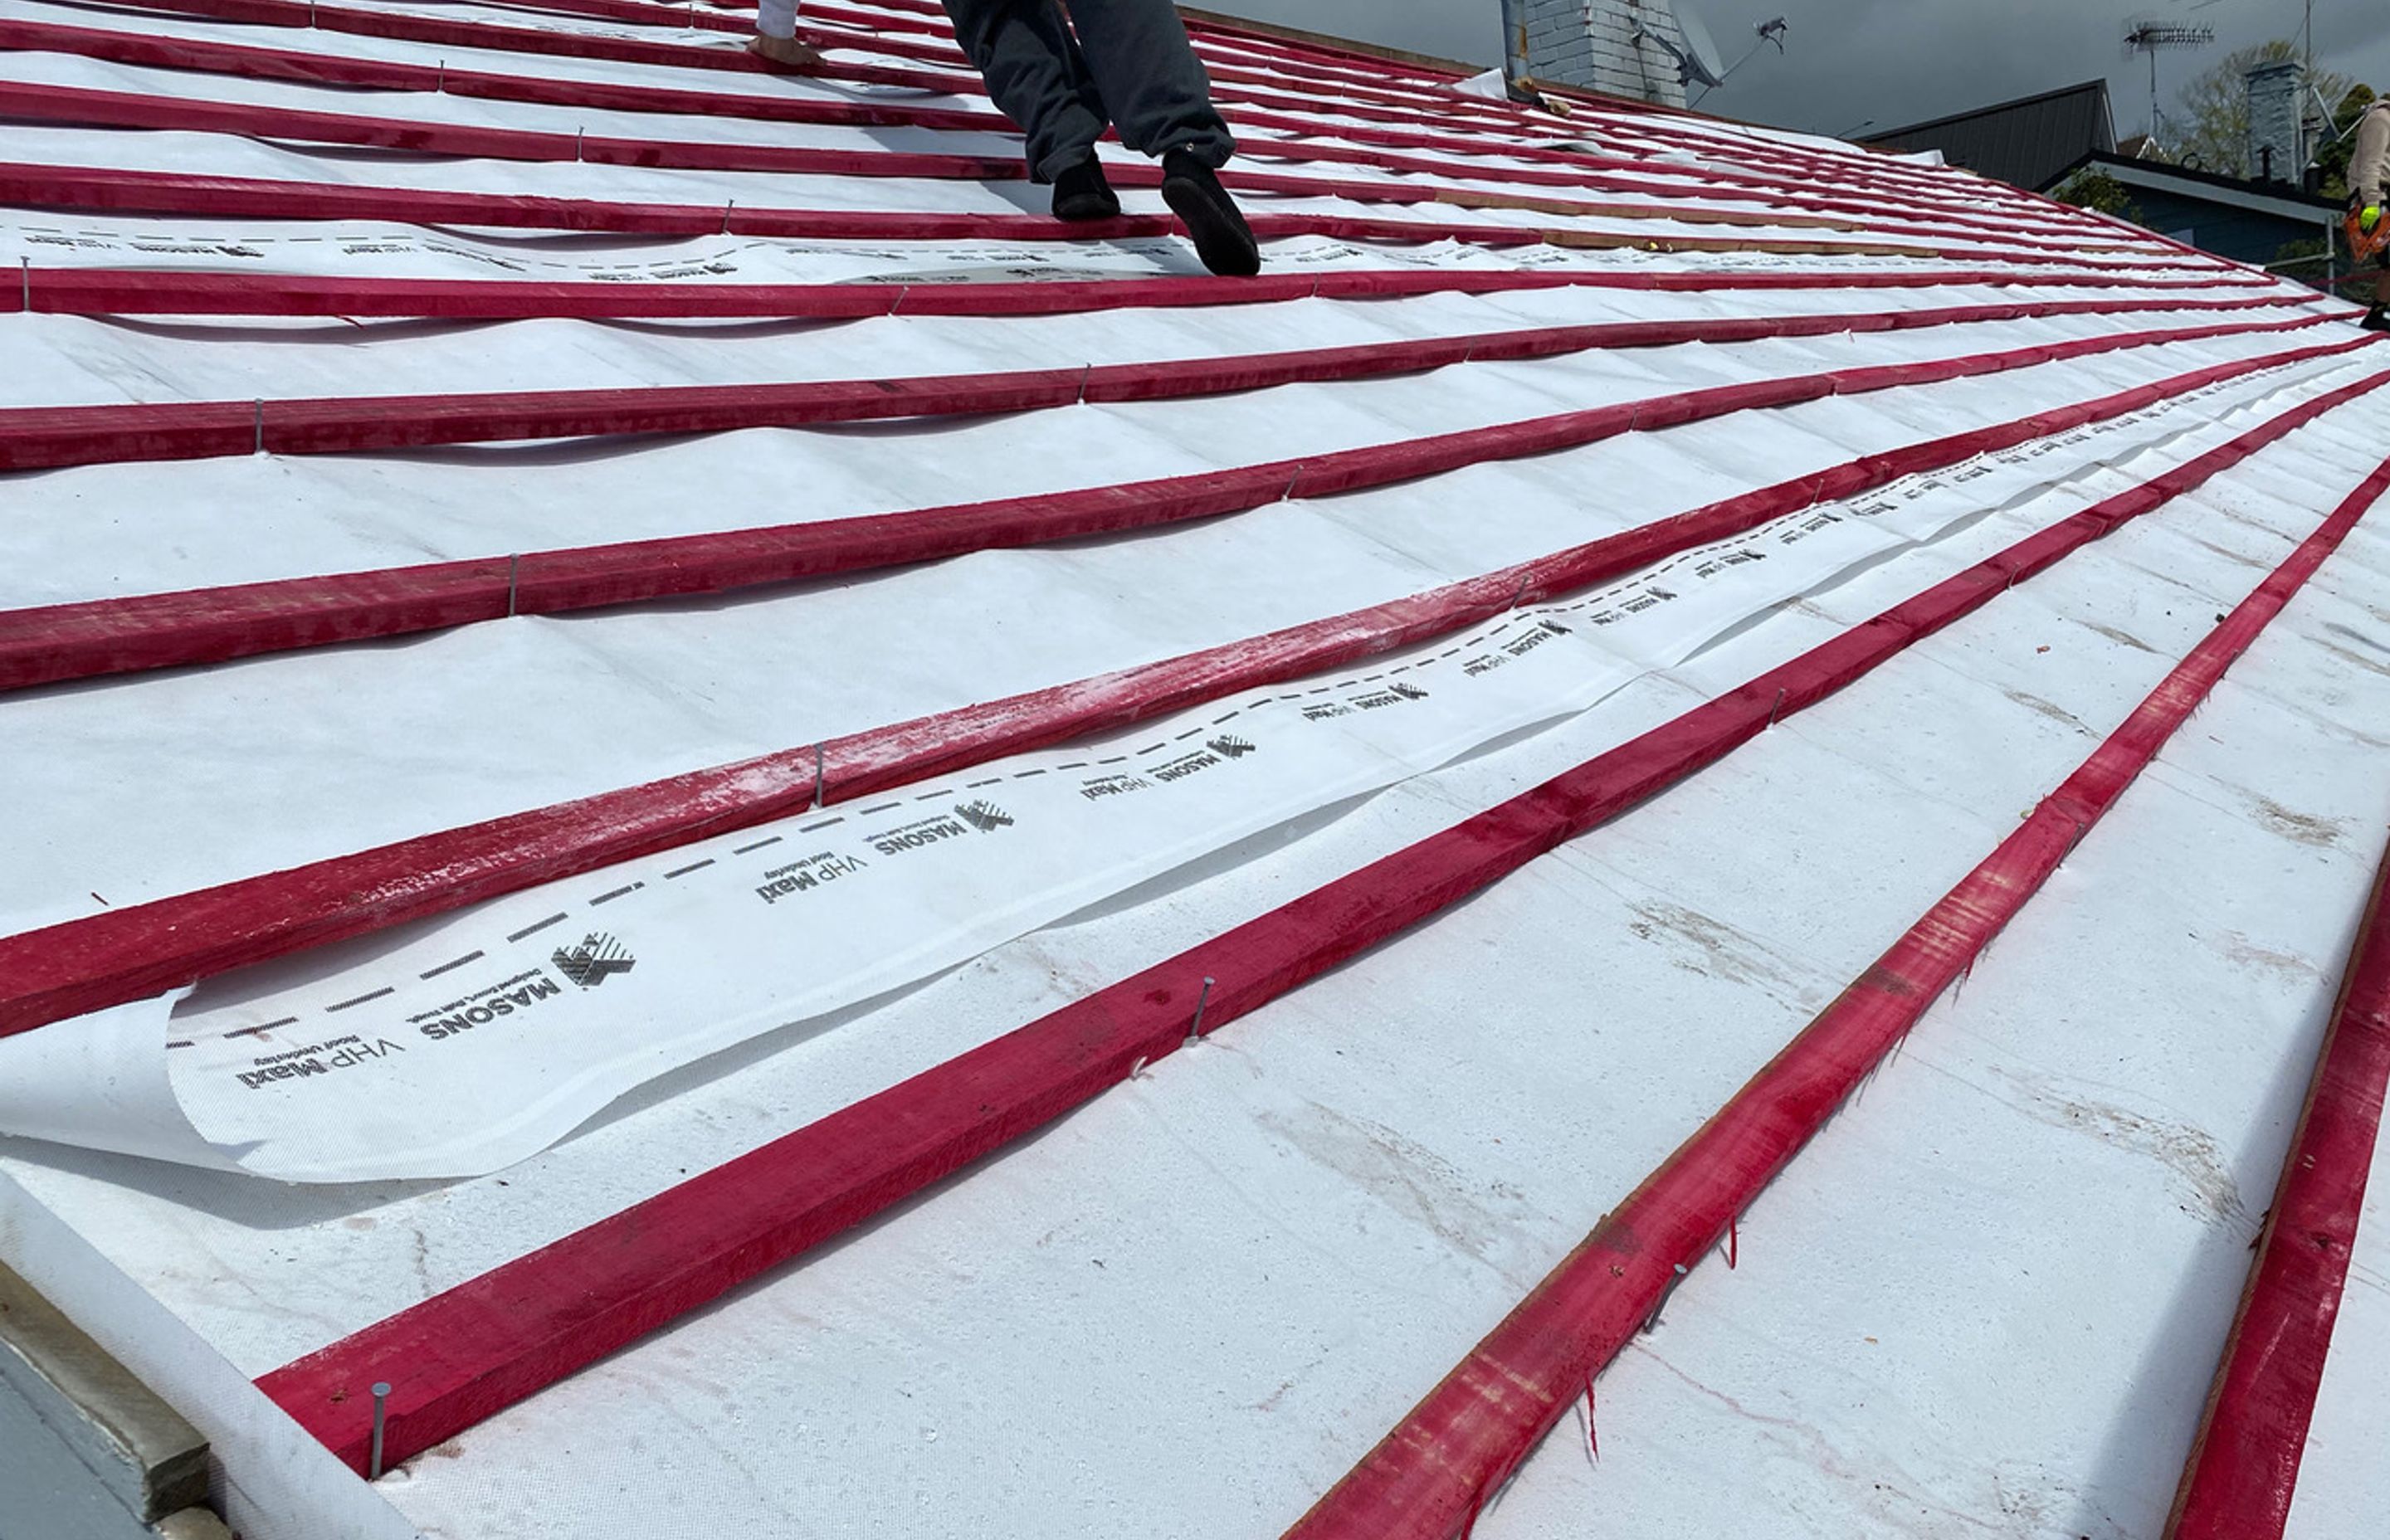 Masons VHP Maxi Roofing Underlay put to the Test in all Weathers